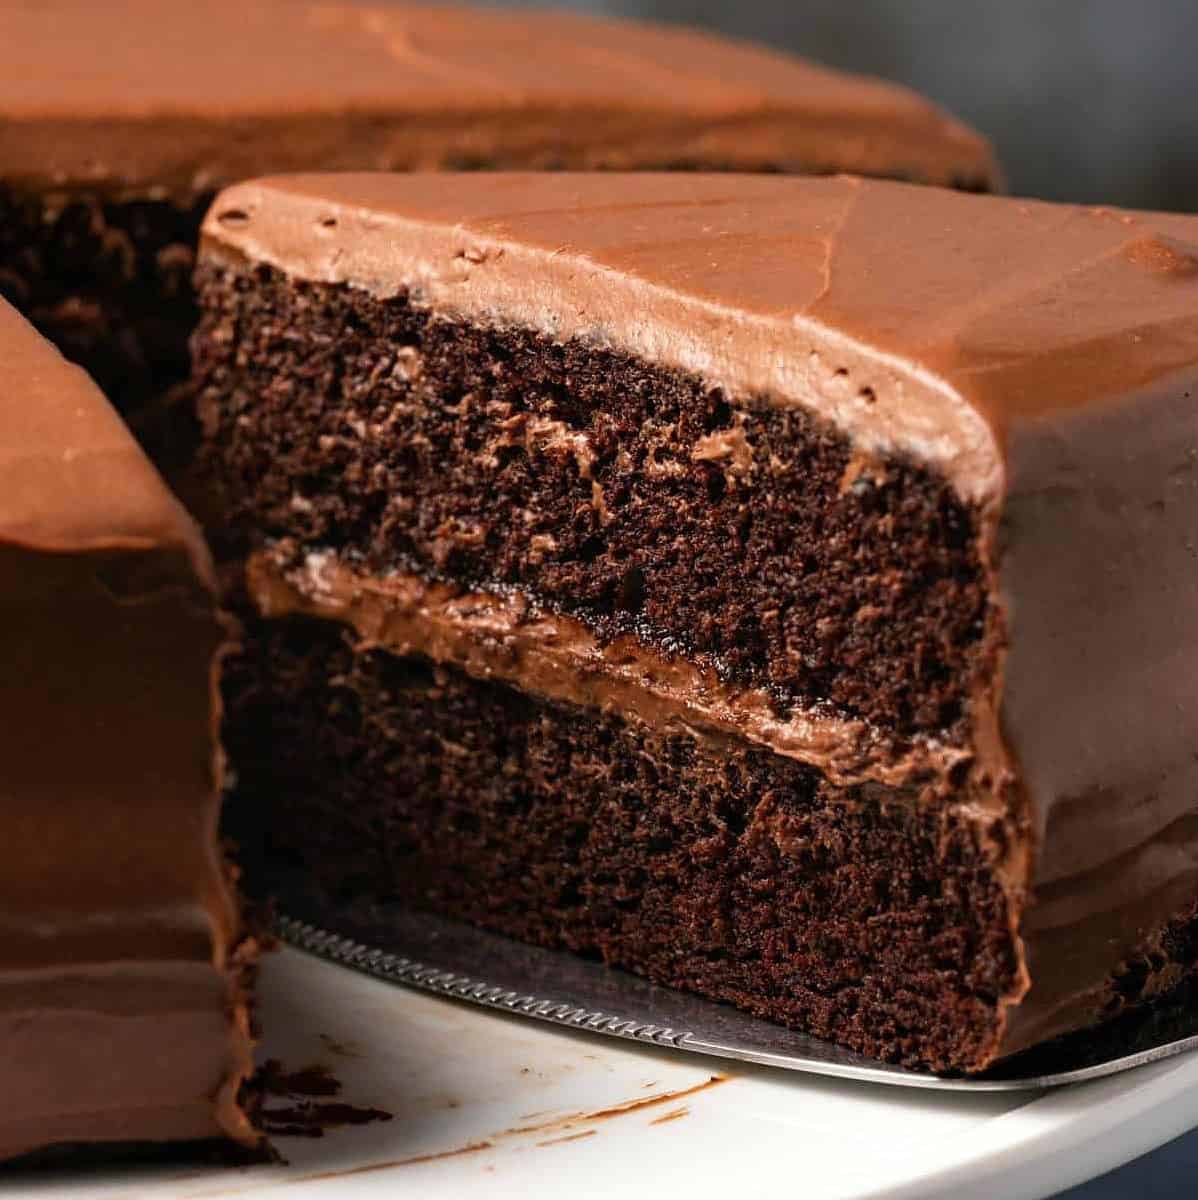  Leave out the guilt and add in the flavor with this decadent chocolate cake recipe.